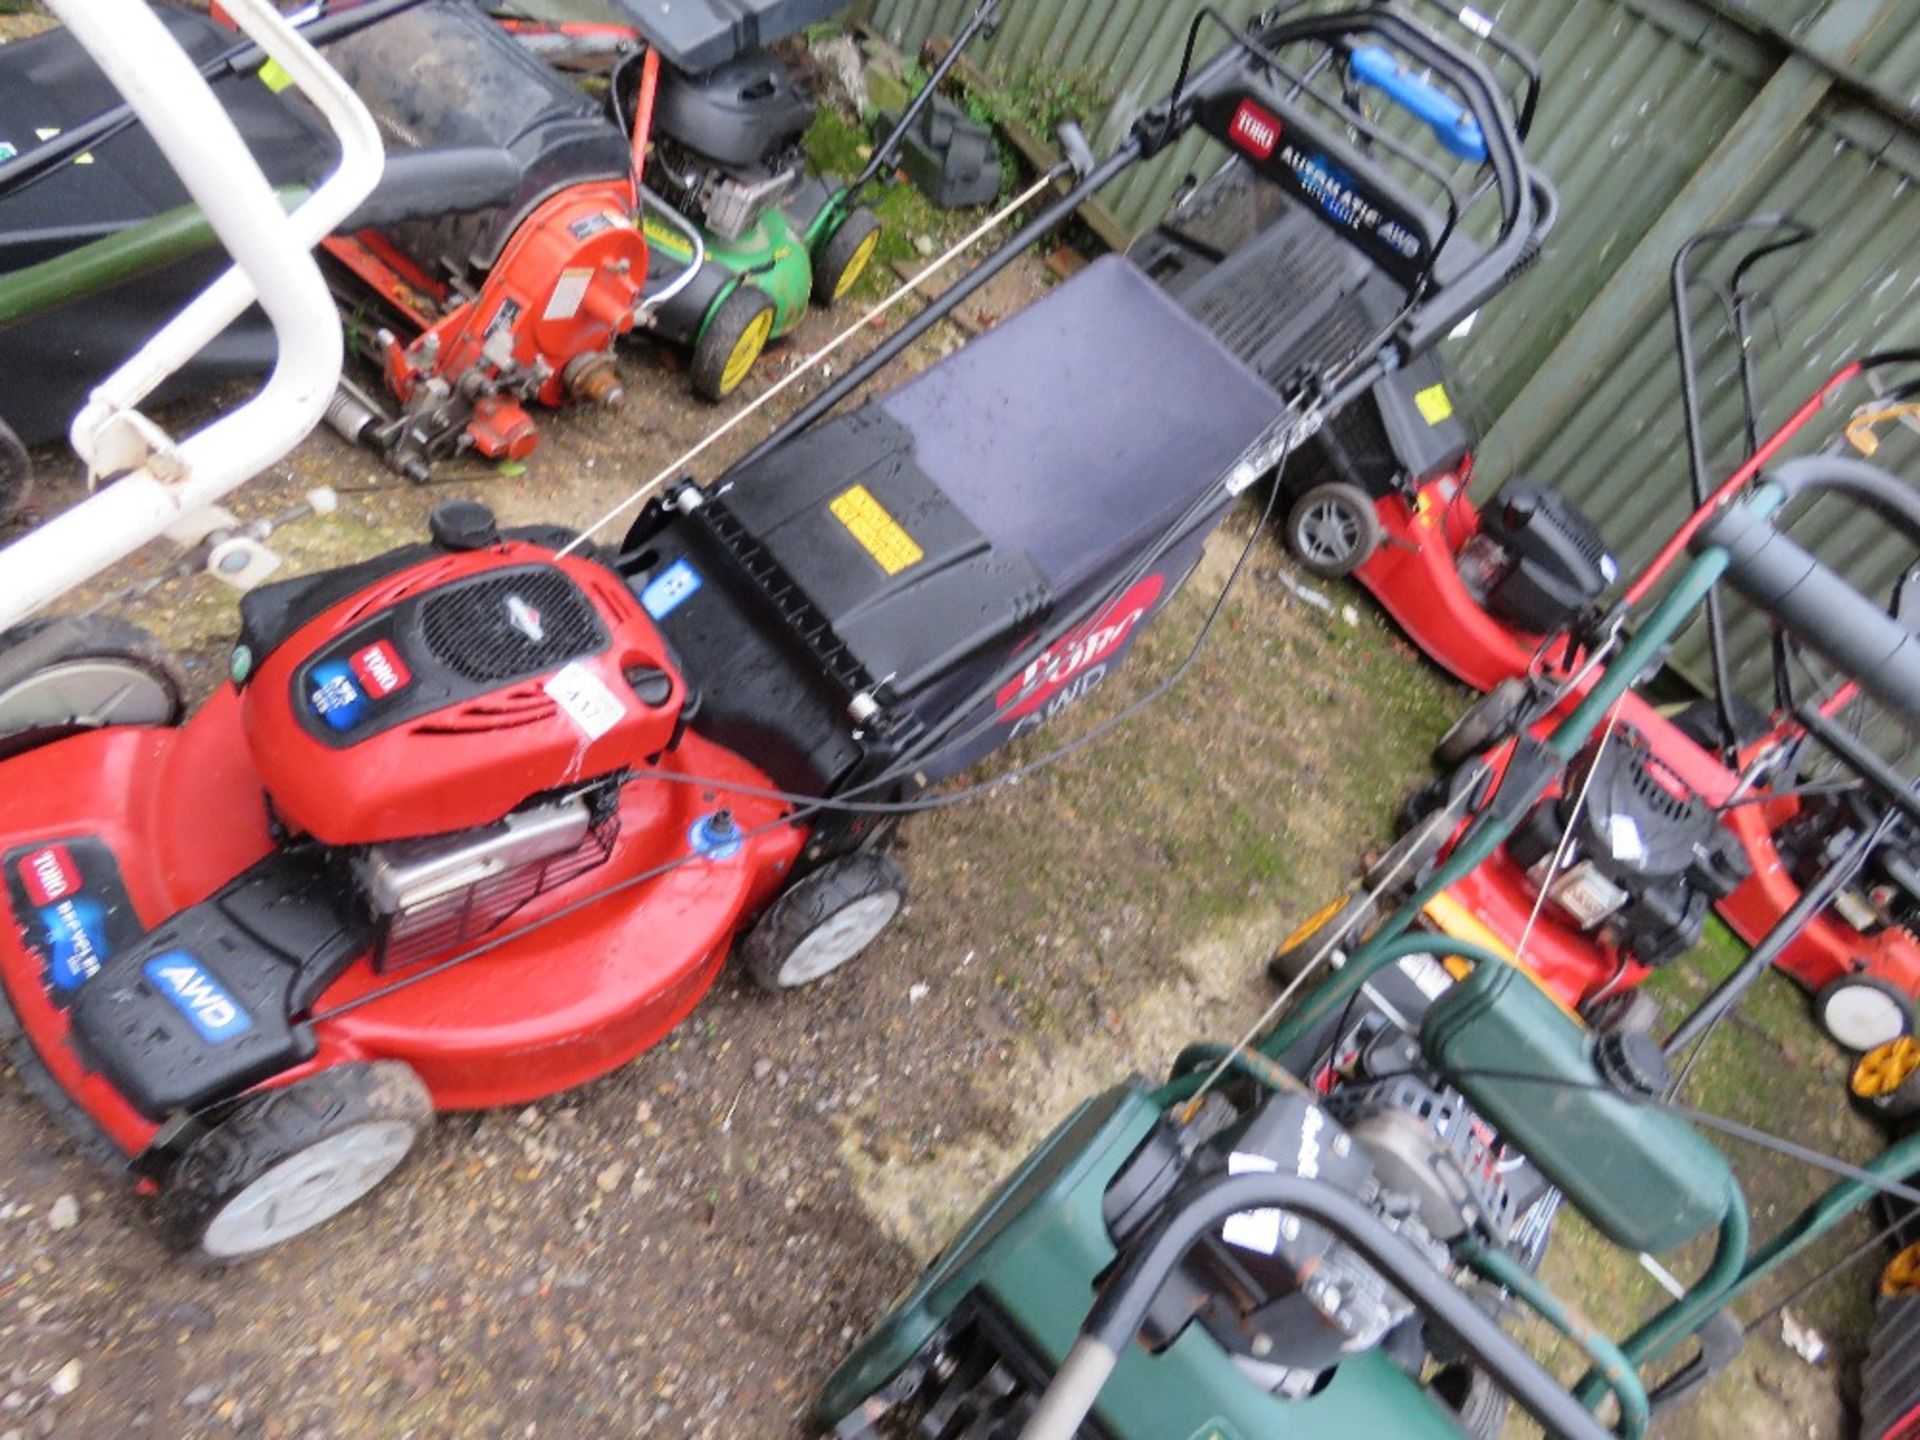 TORO PROFESSIONAL AWD PETROL ENGINED LAWN MOWER, WITH BOX. THIS LOT IS SOLD UNDER THE AUCTIONEERS